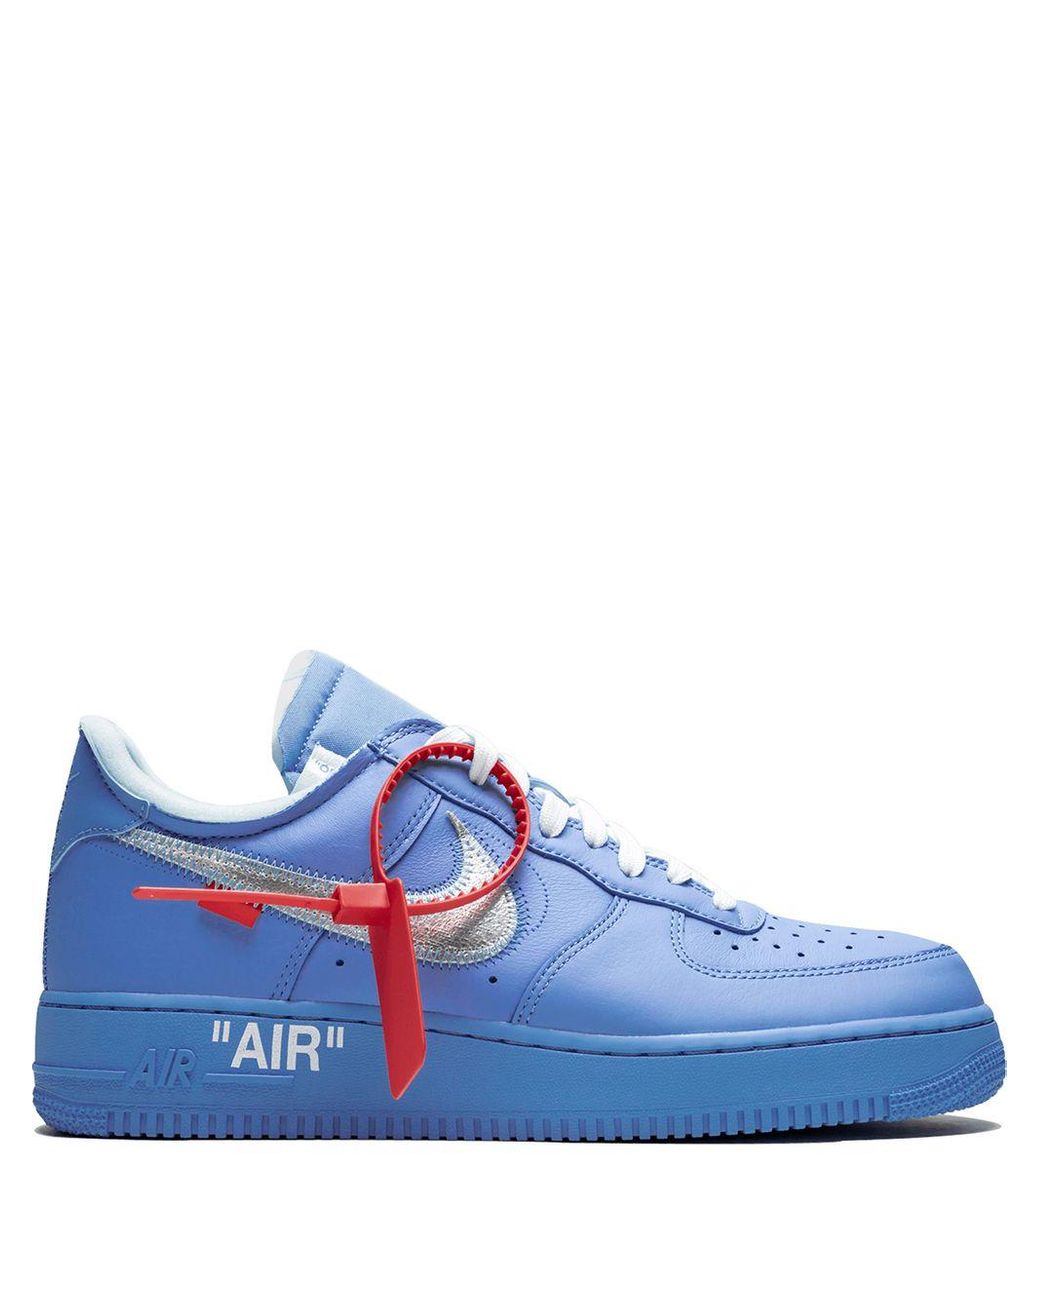 NIKE X OFF-WHITE Air Force 1 Low Mca Sneakers in Blue - Lyst